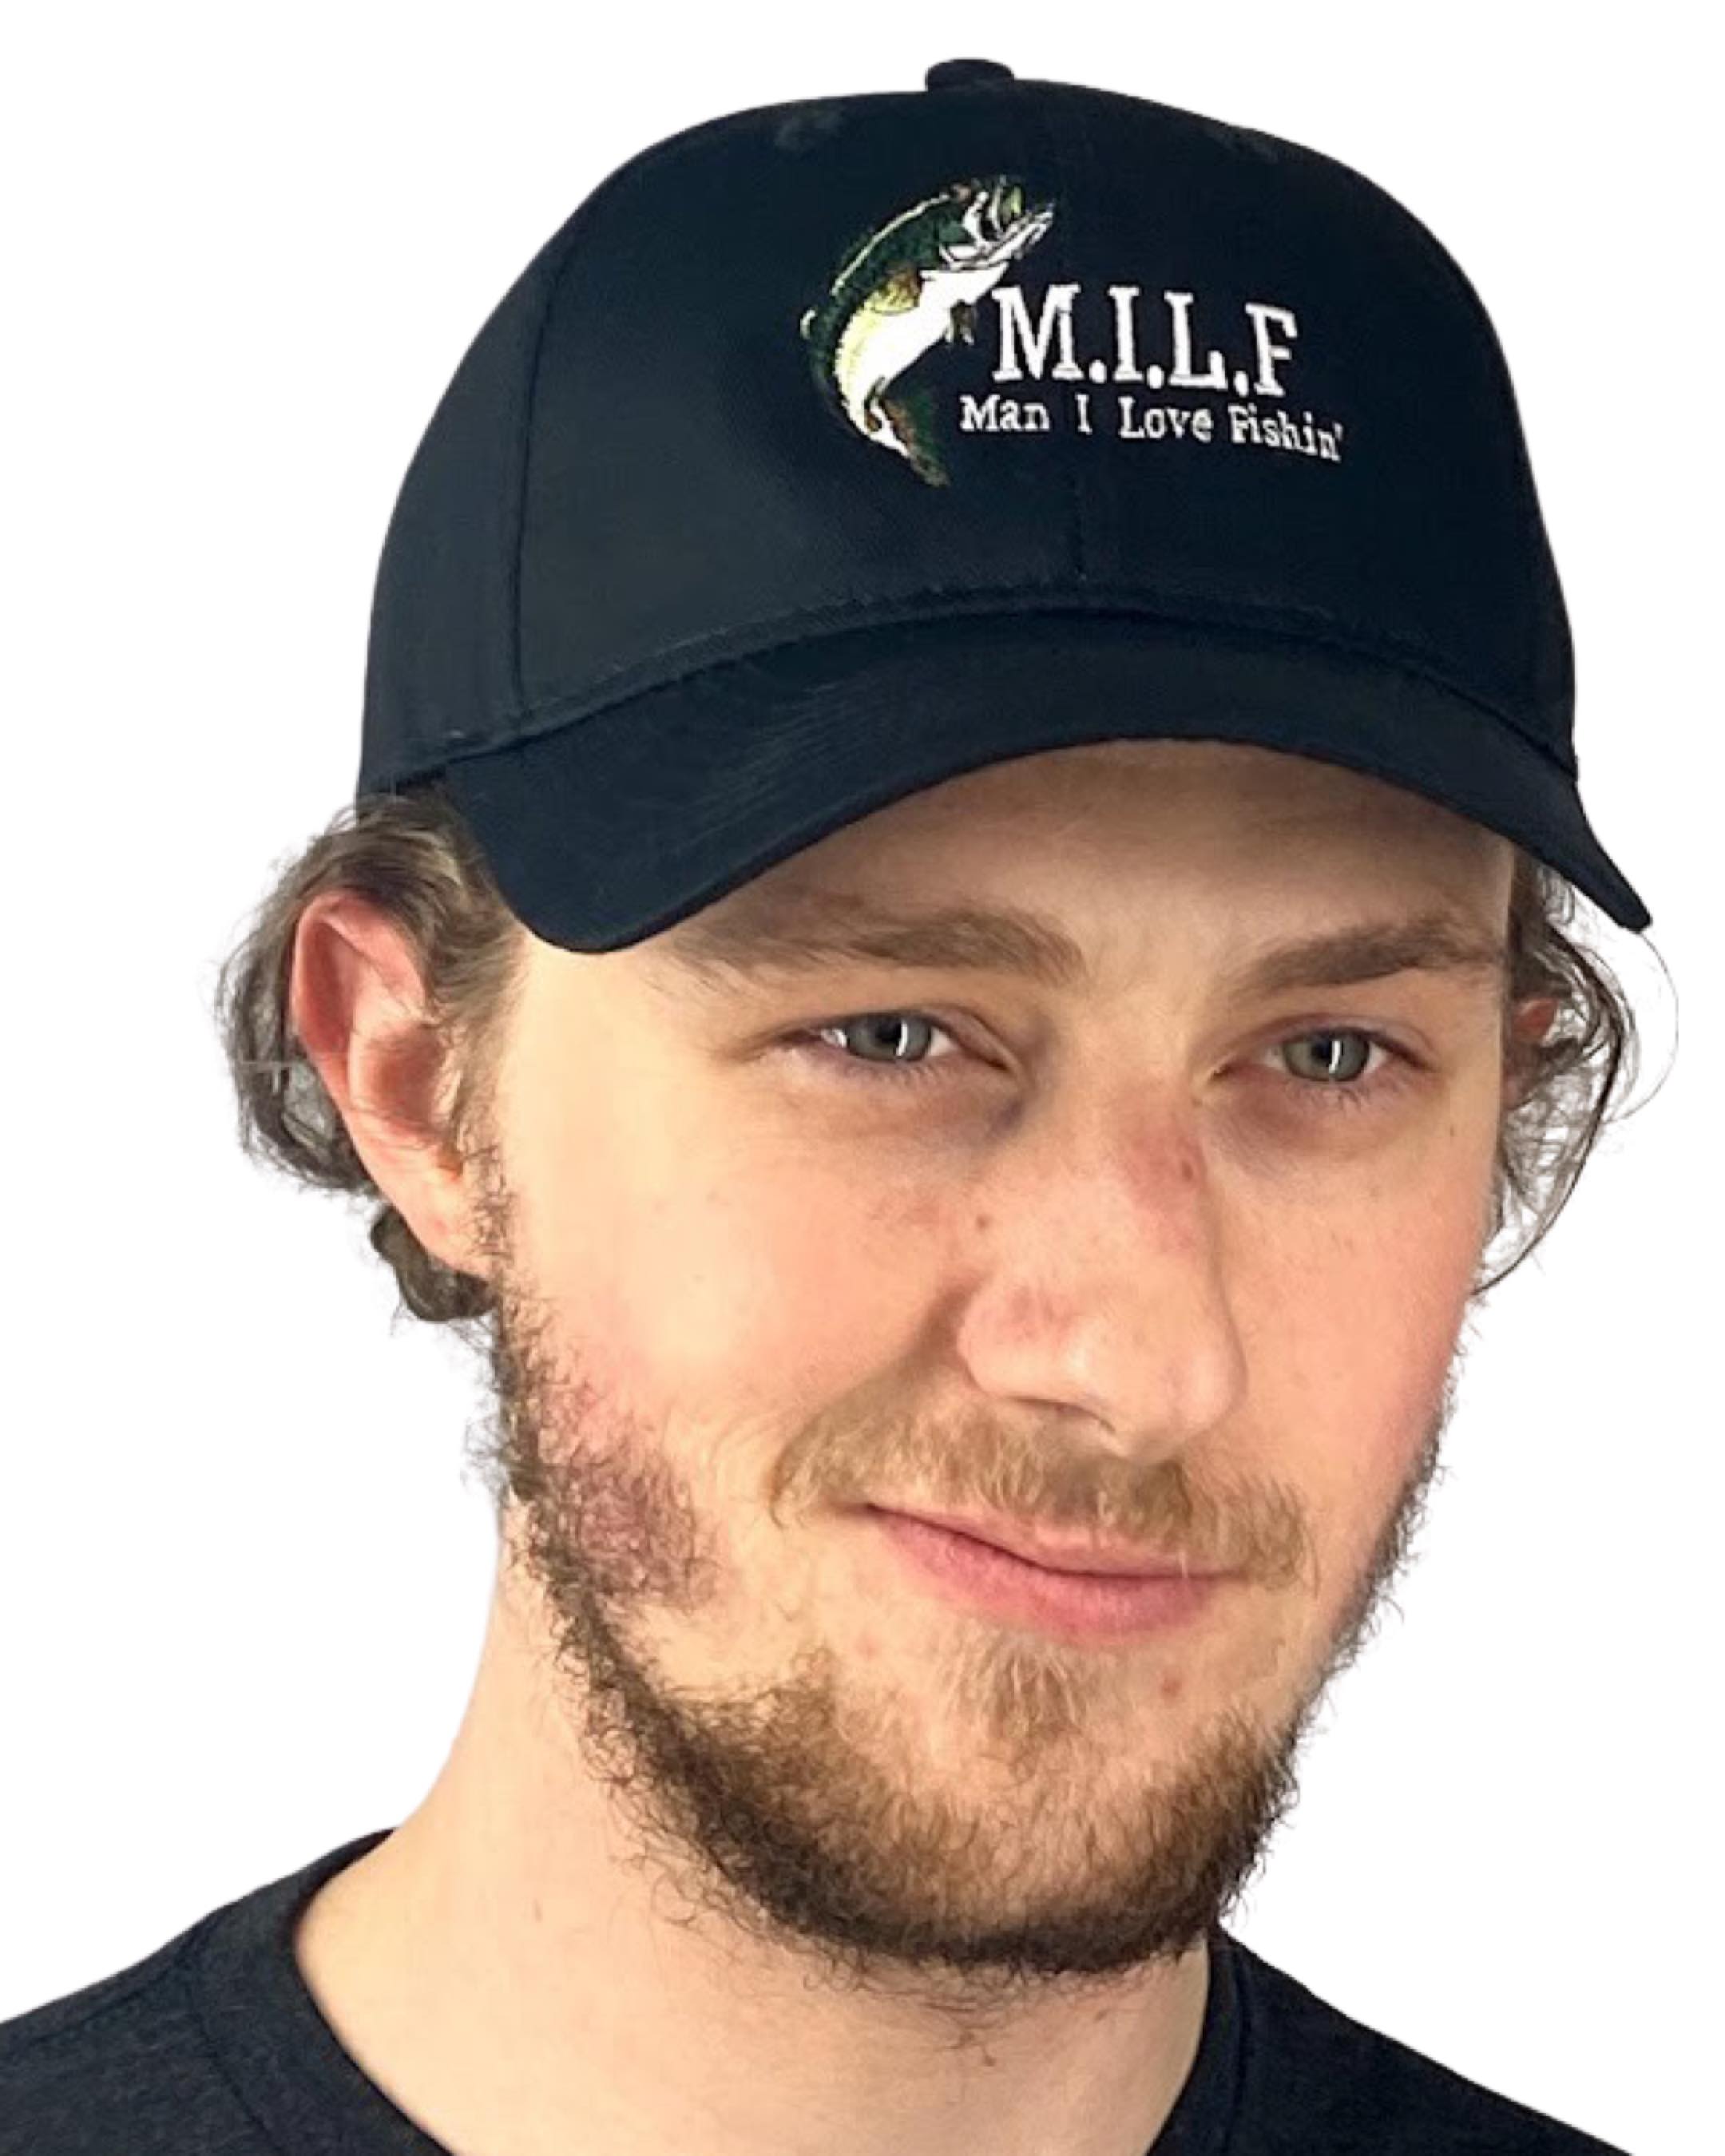 Man I Love Fishin' MILF Embroidered Black Dad Hat, One Size Fits All